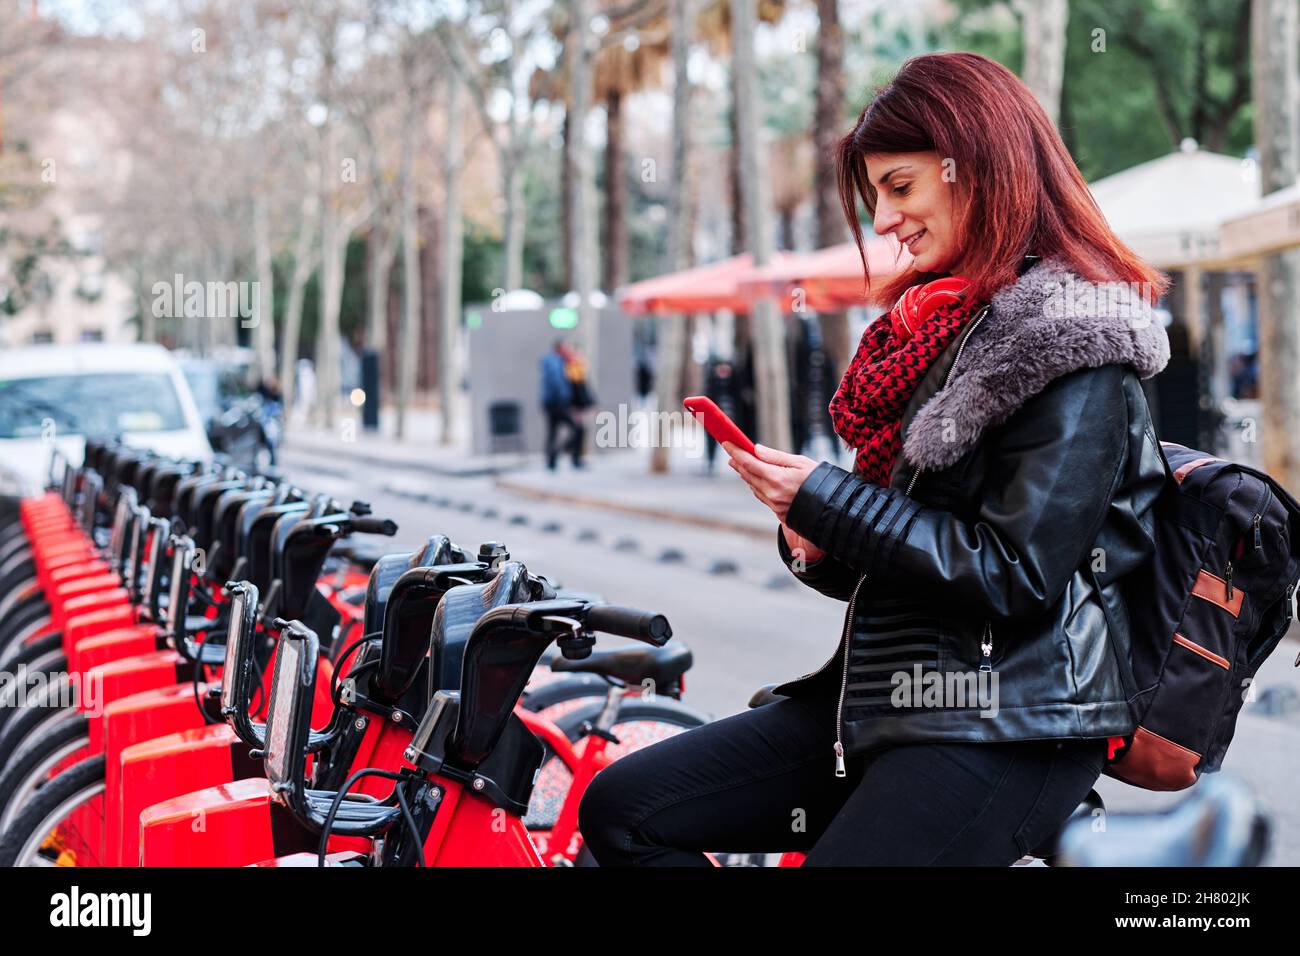 Woman using smartphone in a bike rental station. Stock Photo